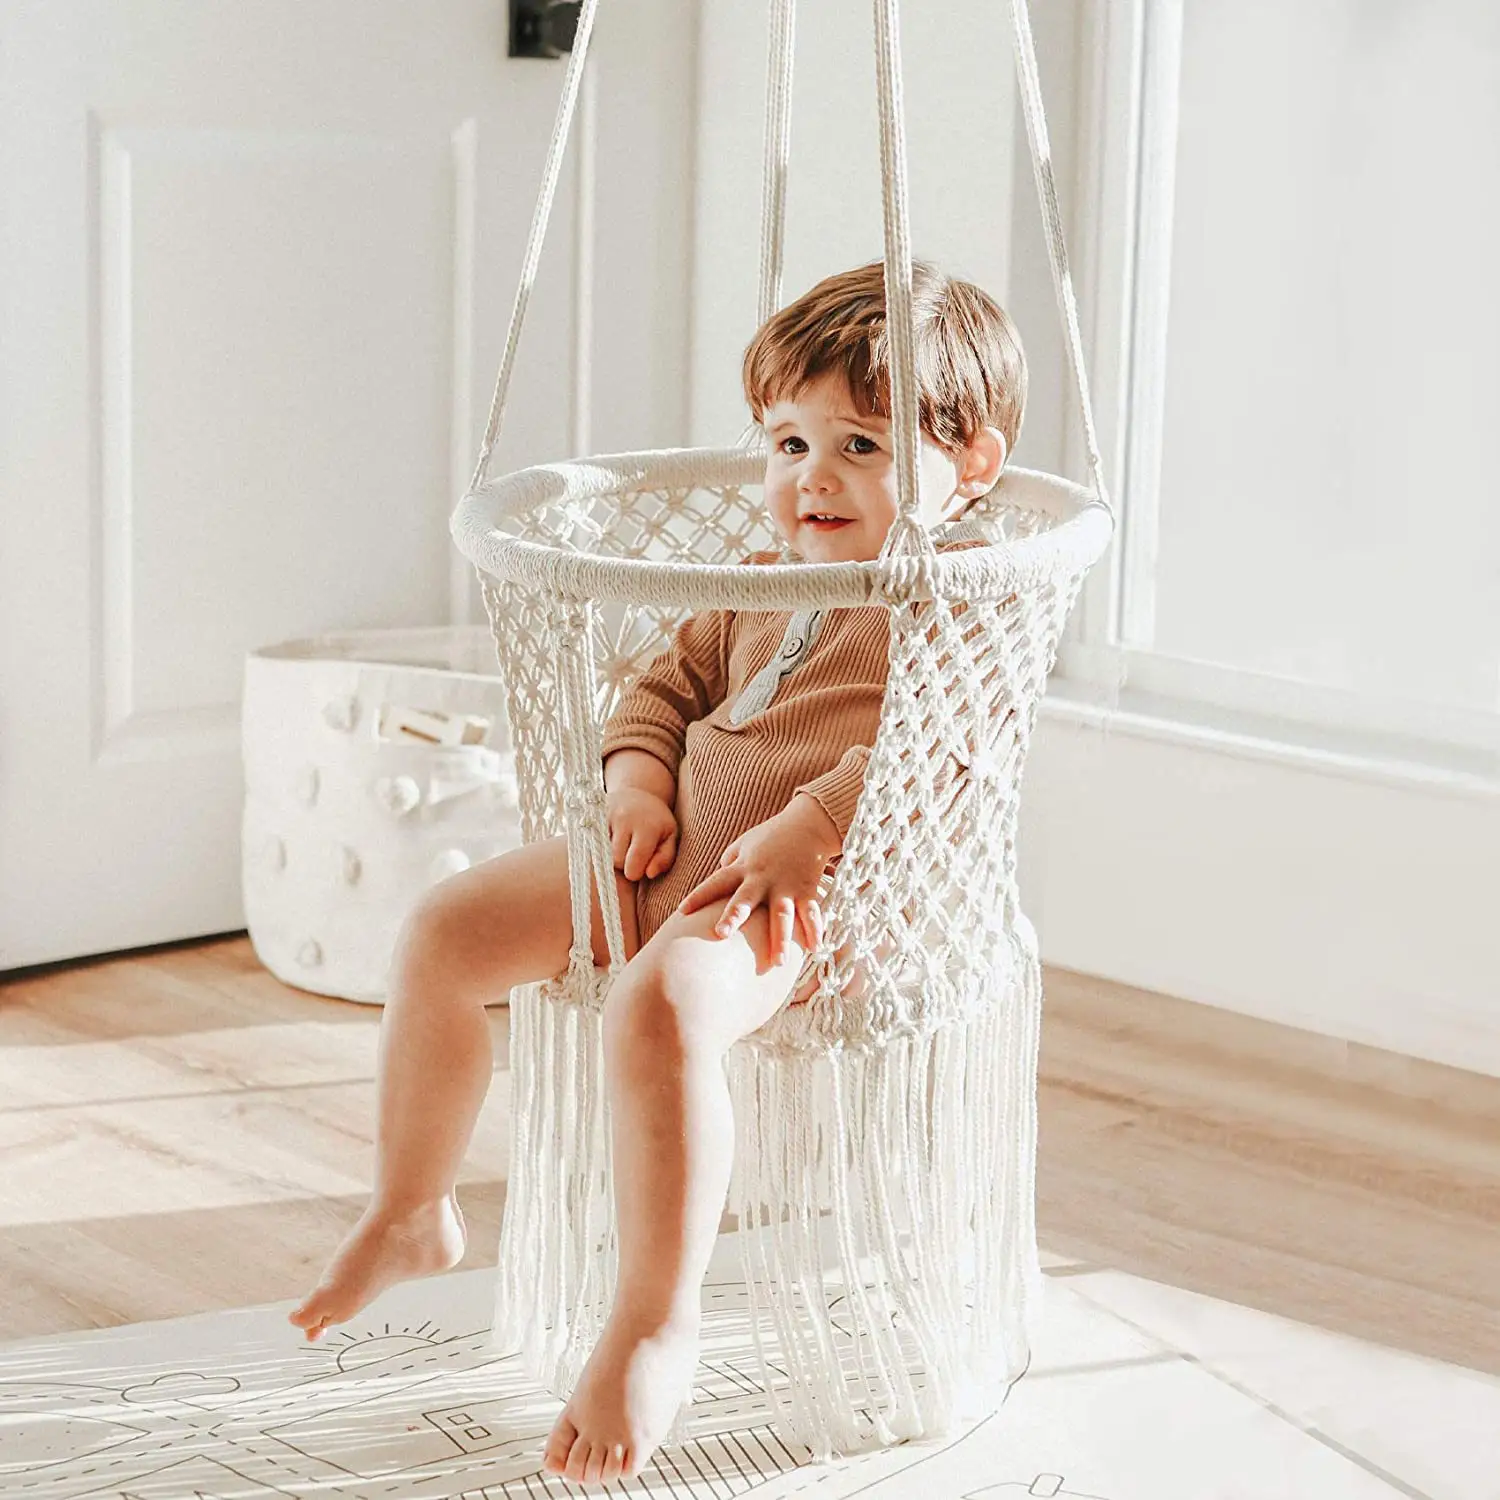 Baby Hanging Swing Seat Chair with Safety Belt, Durable Baby Hammock Chair, Outdoor and Indoor Swing for Kids